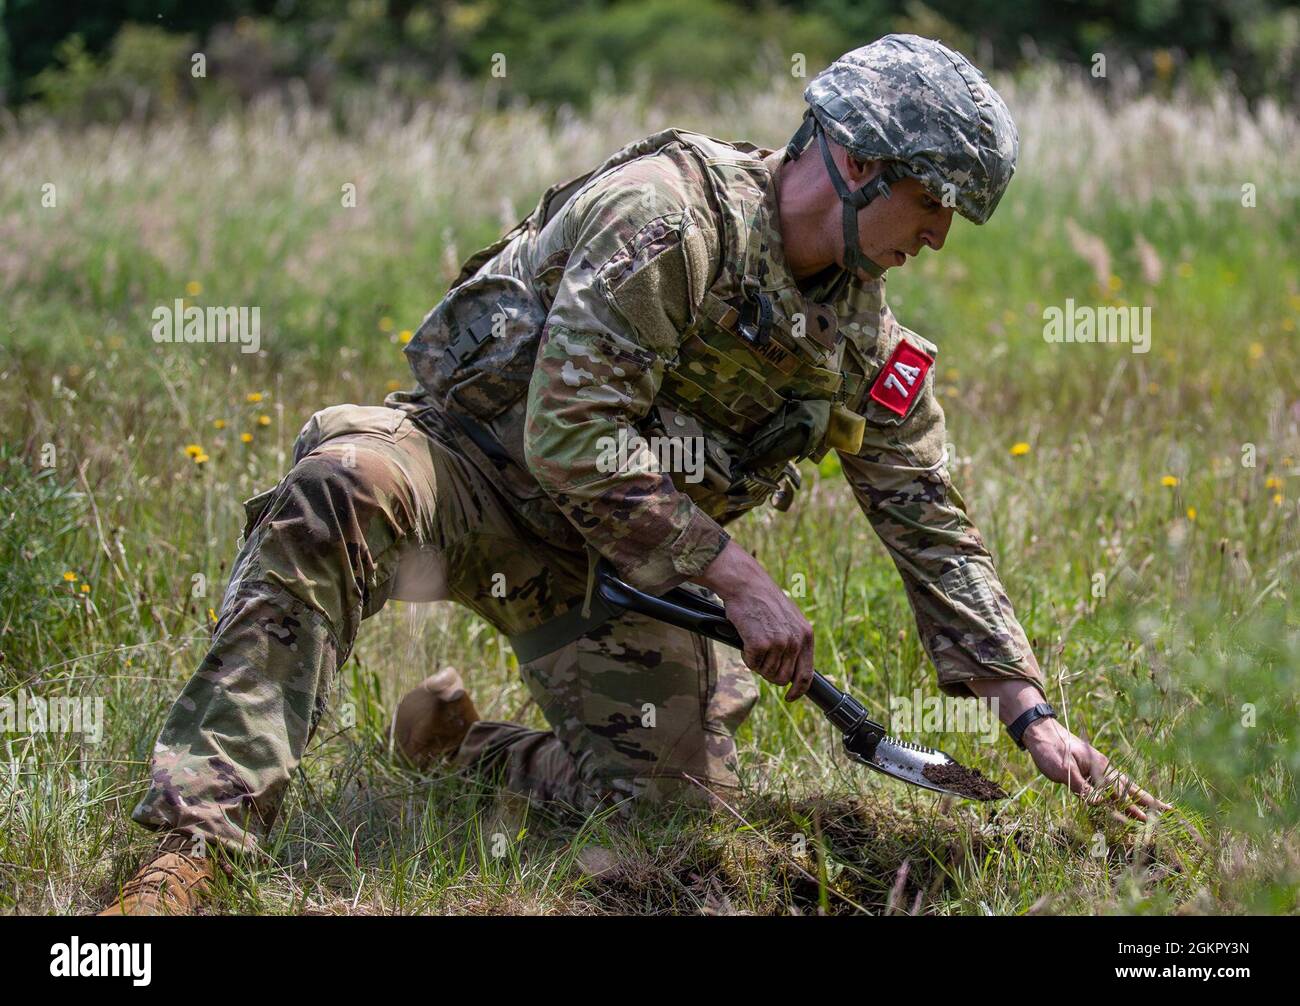 Spc. Colin Hofmann, from Medical Department Activity – Alaska, digs an individual fighting position during the Regional Health Command-Pacific’s Best Leader Competition Wednesday, June 16th 2021 at Joint Base Lewis-McChord.     The Best Leader Competition promotes esprit de corps across the Army, while  recognizing Soldiers who demonstrate the Army Values and embody the Warrior  Ethos. The competition recognizes those Soldiers who possess superb military  bearing and communication skills, in-depth knowledge of military subjects,  and the ability to perform Soldier and warrior skills at levels Stock Photo